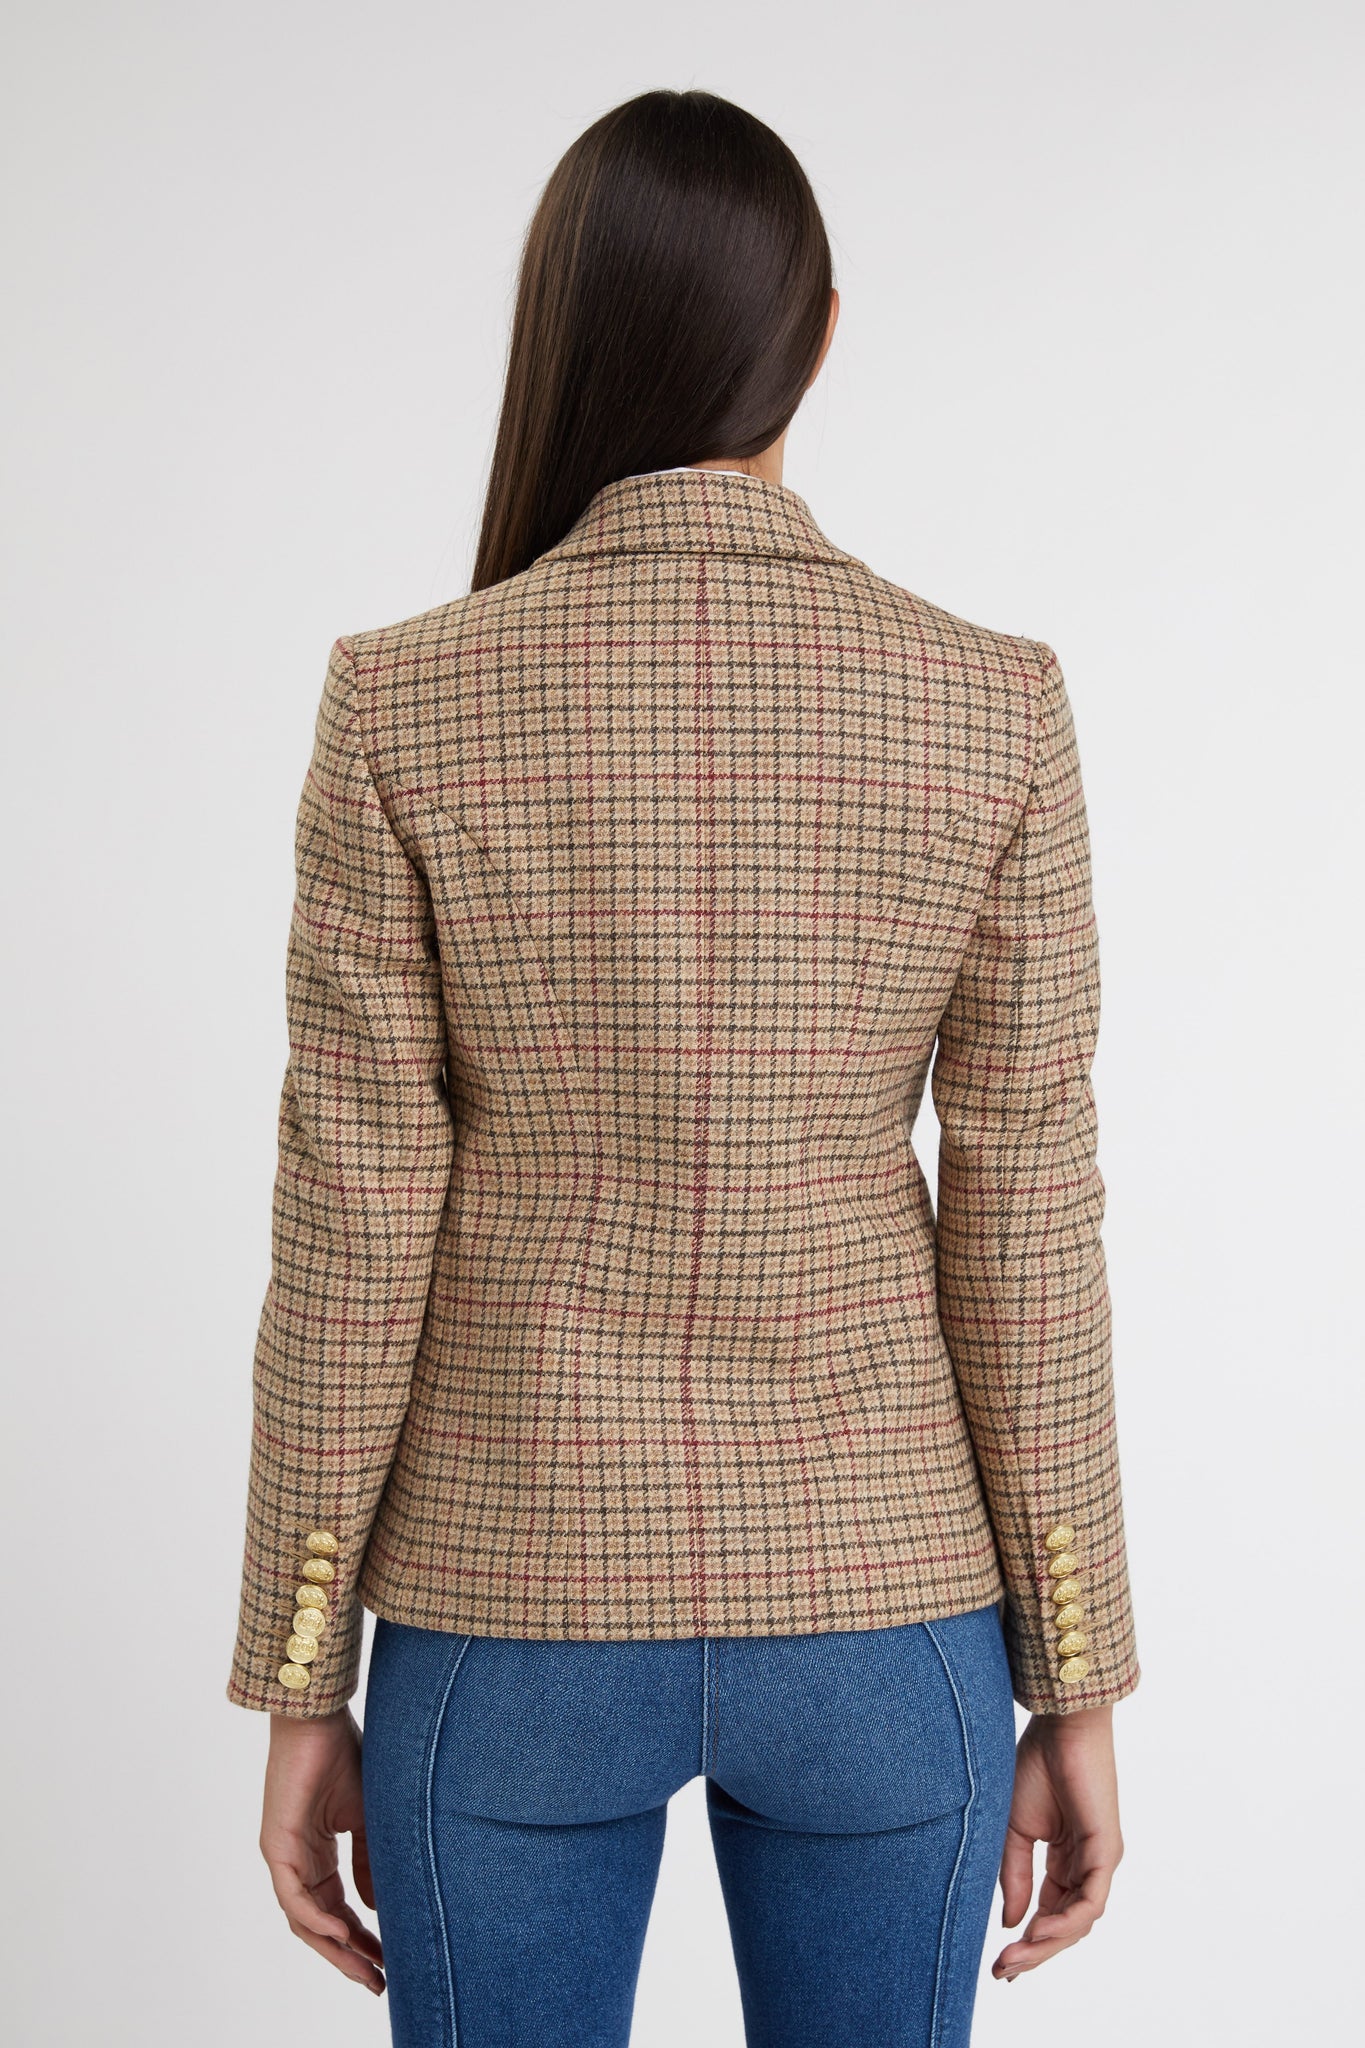 back of British made double breasted blazer that fastens with a single button hole to create a more form fitting silhouette with two pockets and gold button detailing this blazer is made from camel black and red check charlton tweed